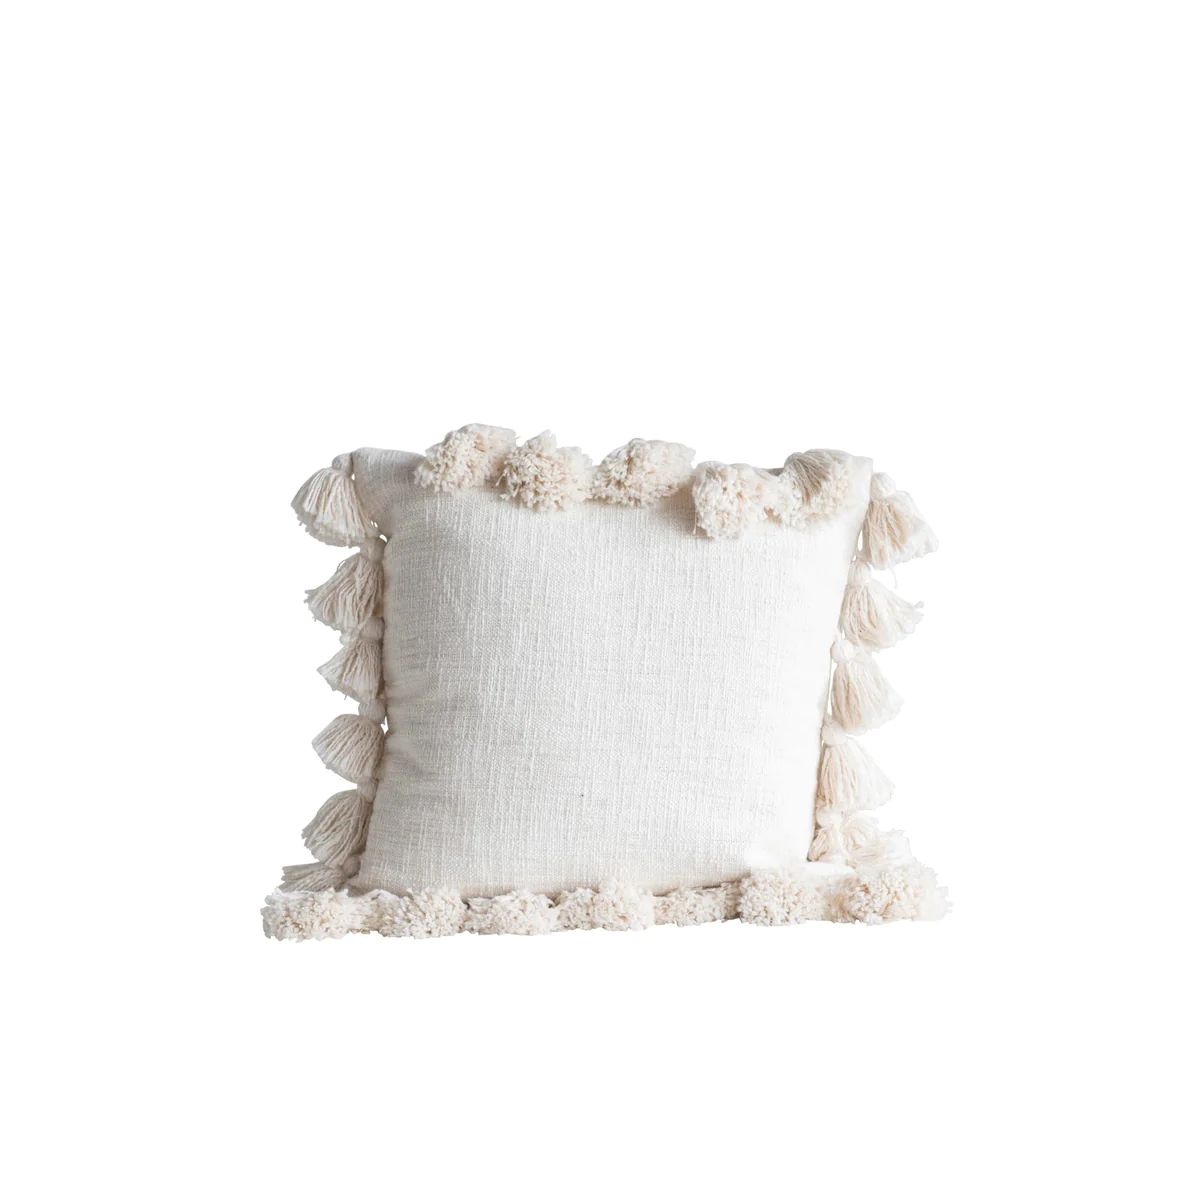 Woven Cotton Cream Throw Pillow with Tassels | APIARY by The Busy Bee